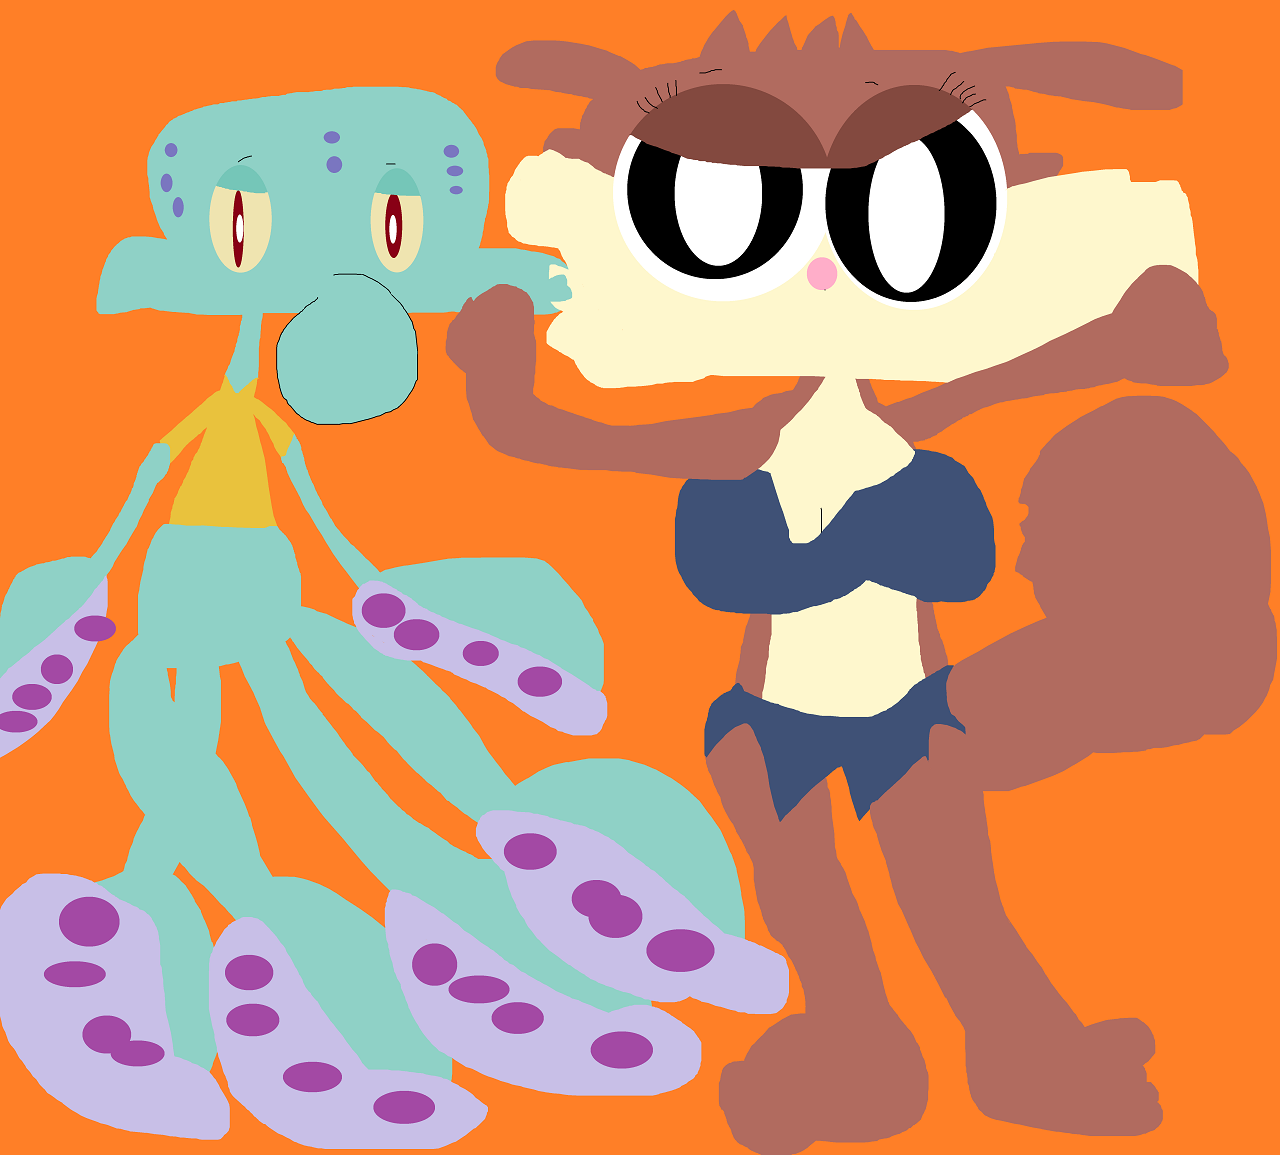 Squidward Being Kissed By Sandy In Toonier Style by Falconlobo